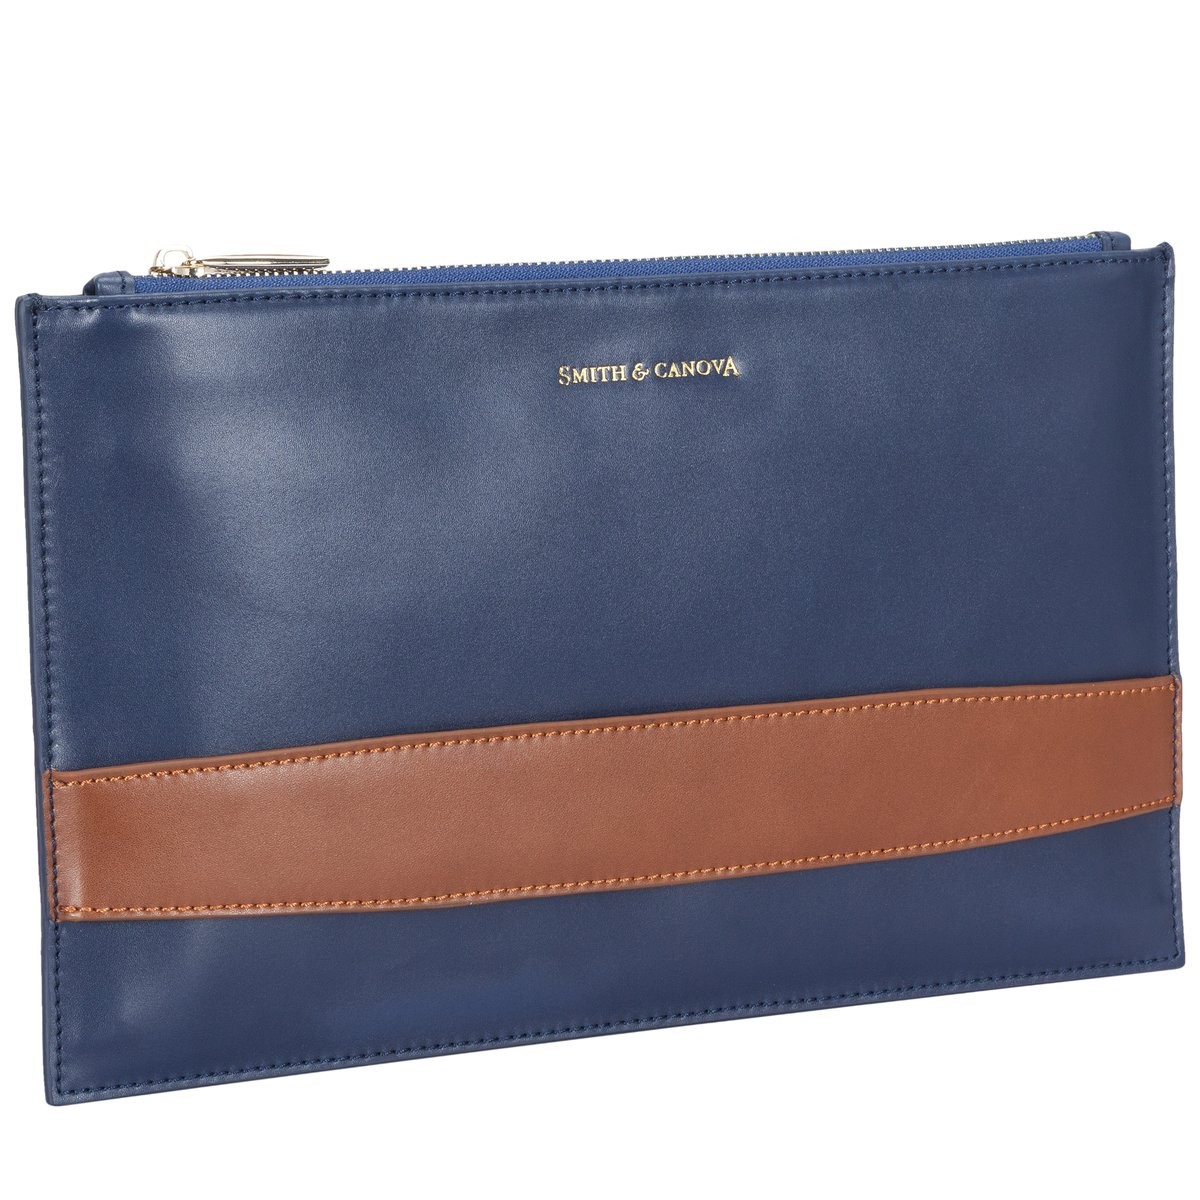 Smooth Leather Zip Top Clutch Bag - Smith & Canova